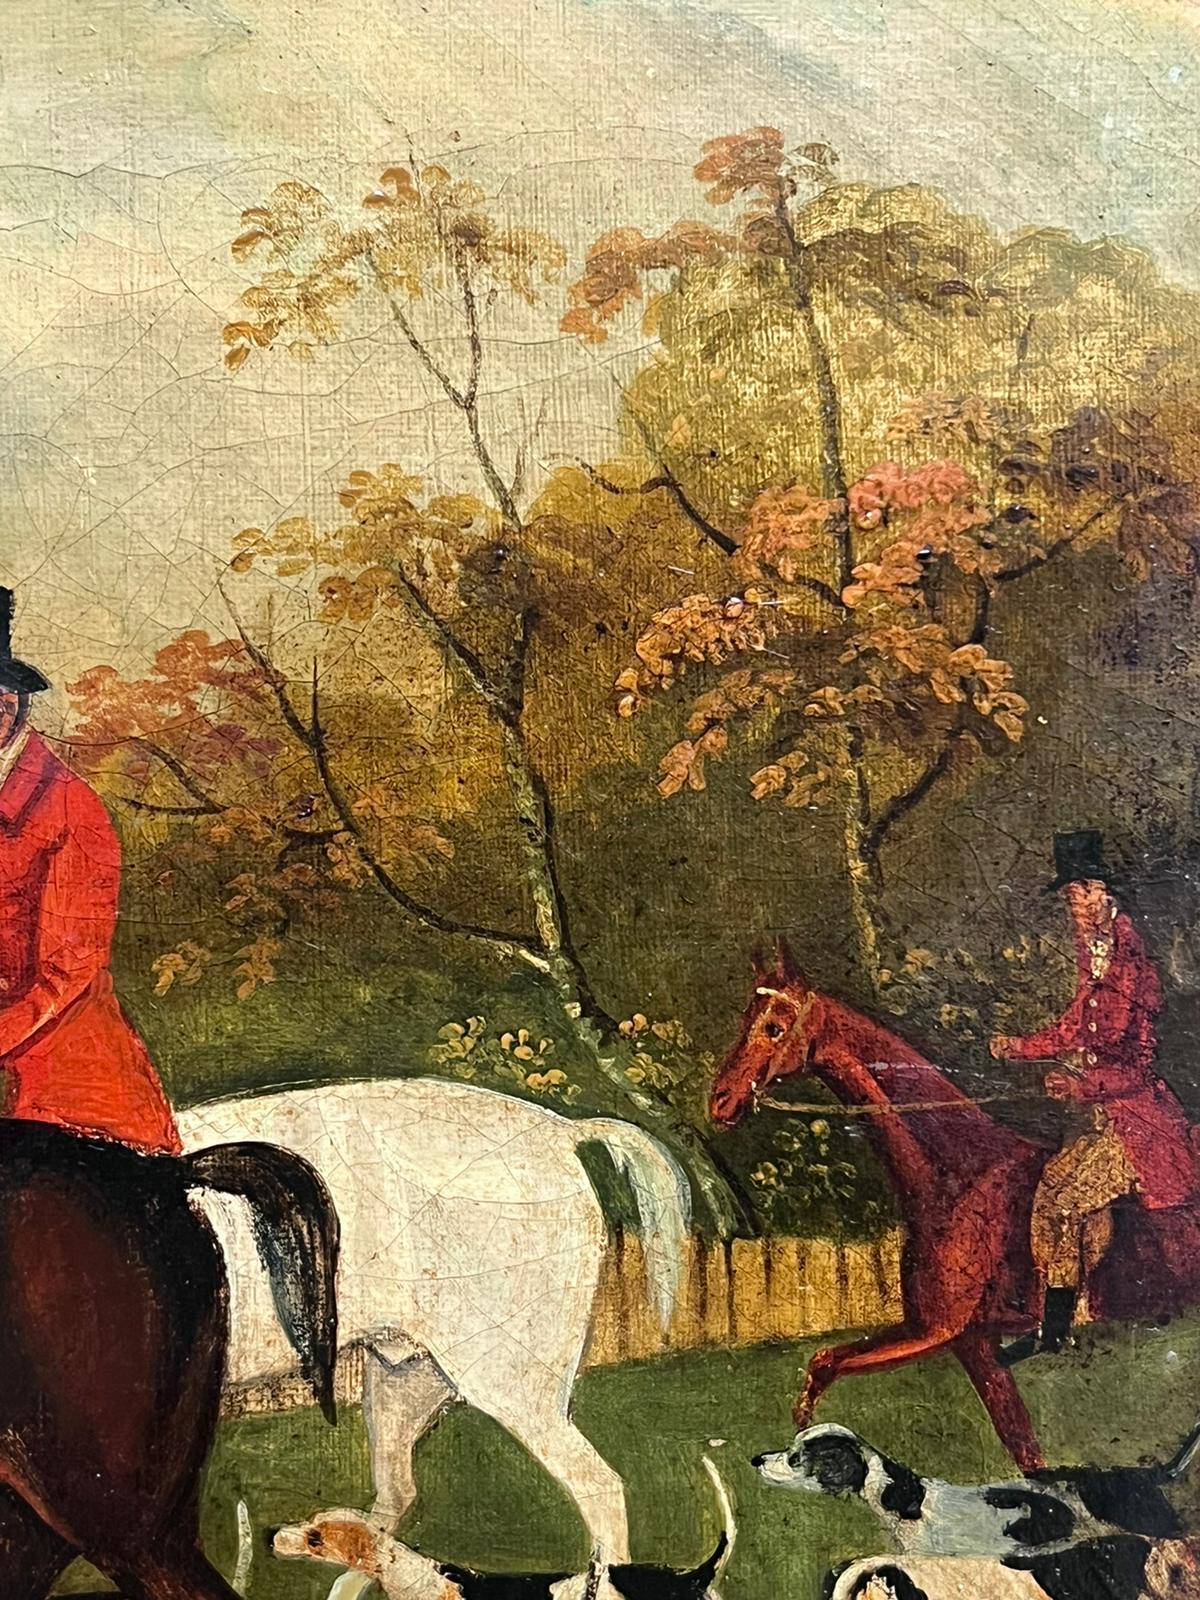 The Fox Hunt
English artist, 20th century
oil on board, framed
framed: 15 x 16.5 inches
board: 10 x 12 inches
provenance: private collection
condition: very good and sound condition though with a minor indent to the surface; frame has a minor scuff